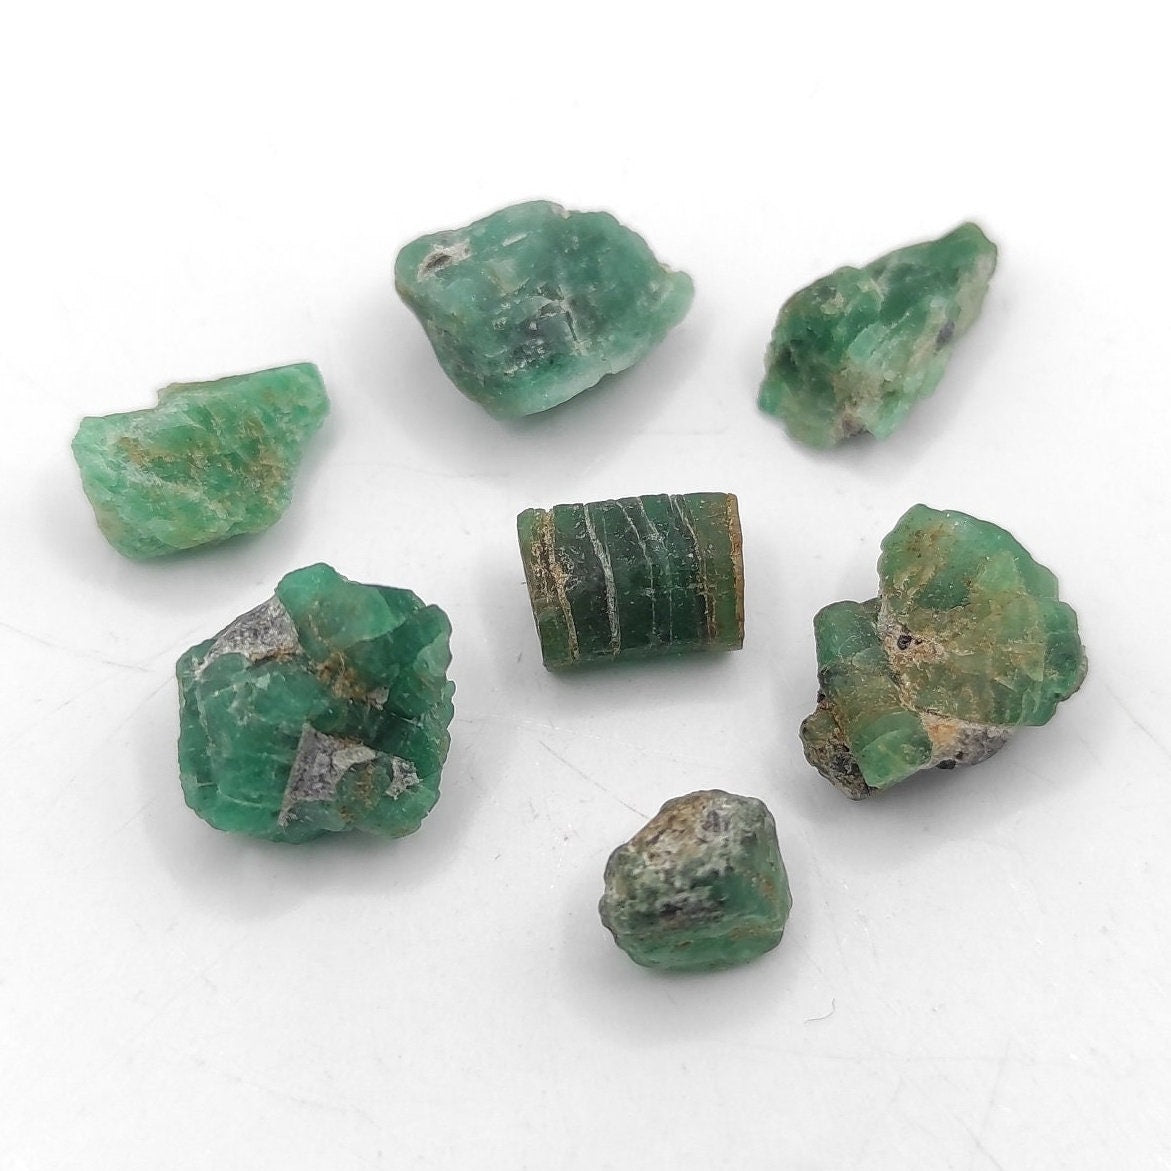 18ct Emerald Lot - Natural Rough Emeralds - Untreated Natural Earth Mined Emeralds from Zambia - Small Raw Emeralds - Loose Gemstones